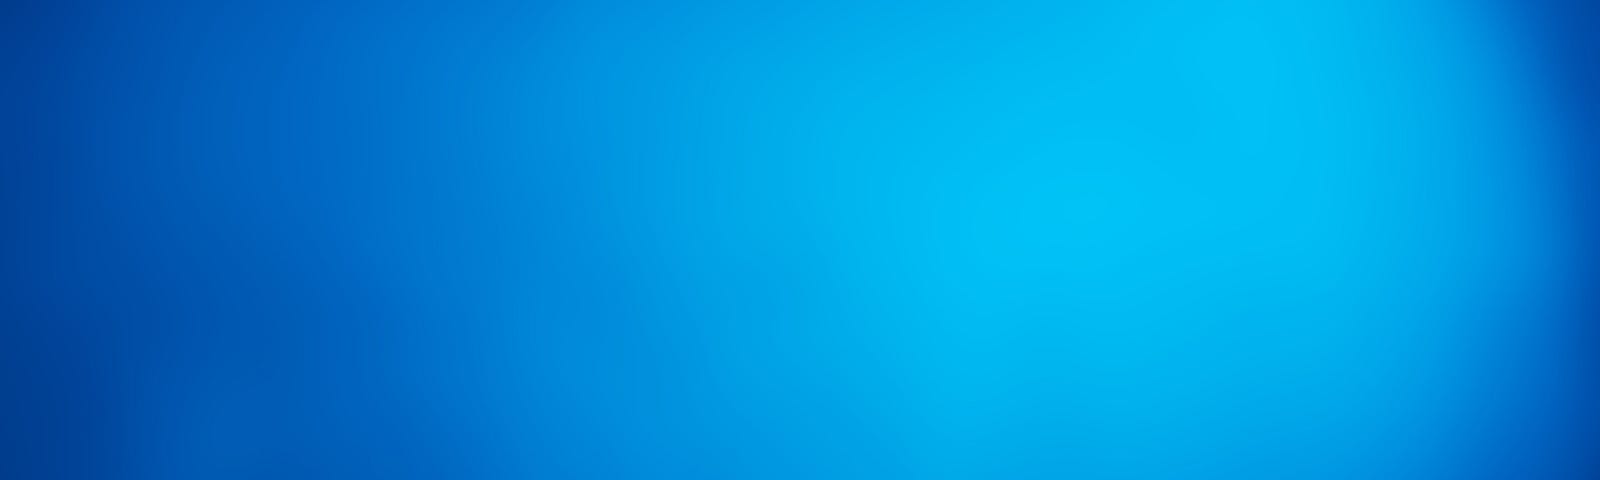 A half-closed laptop on a blue background